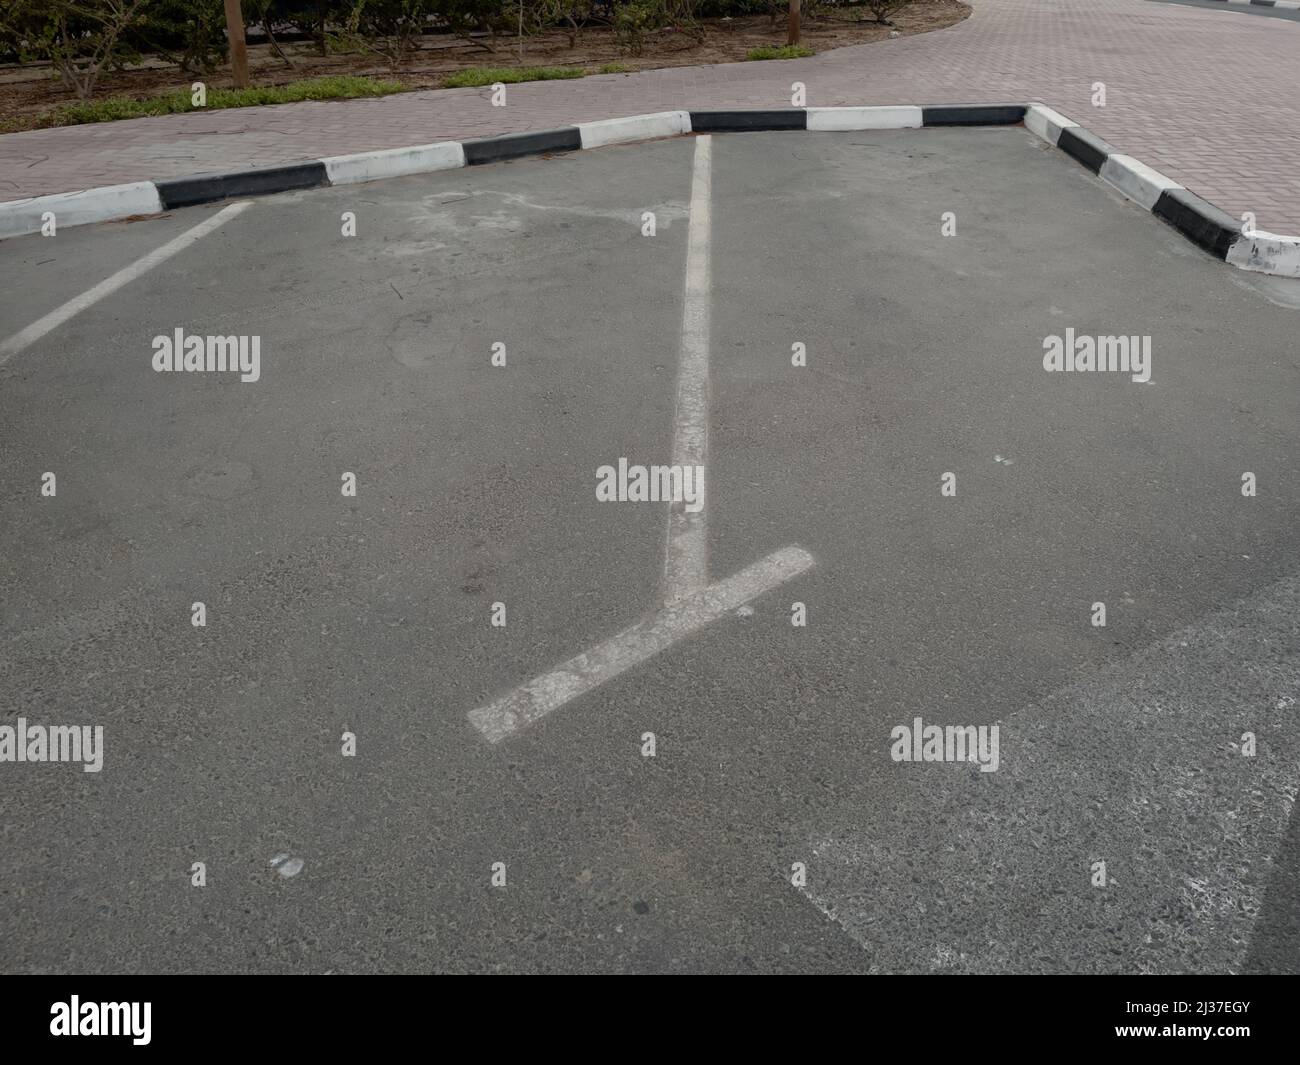 Empty public parking spaces for vehicles on the side of a street in Dubai, United Arab Emirates. Stock Photo